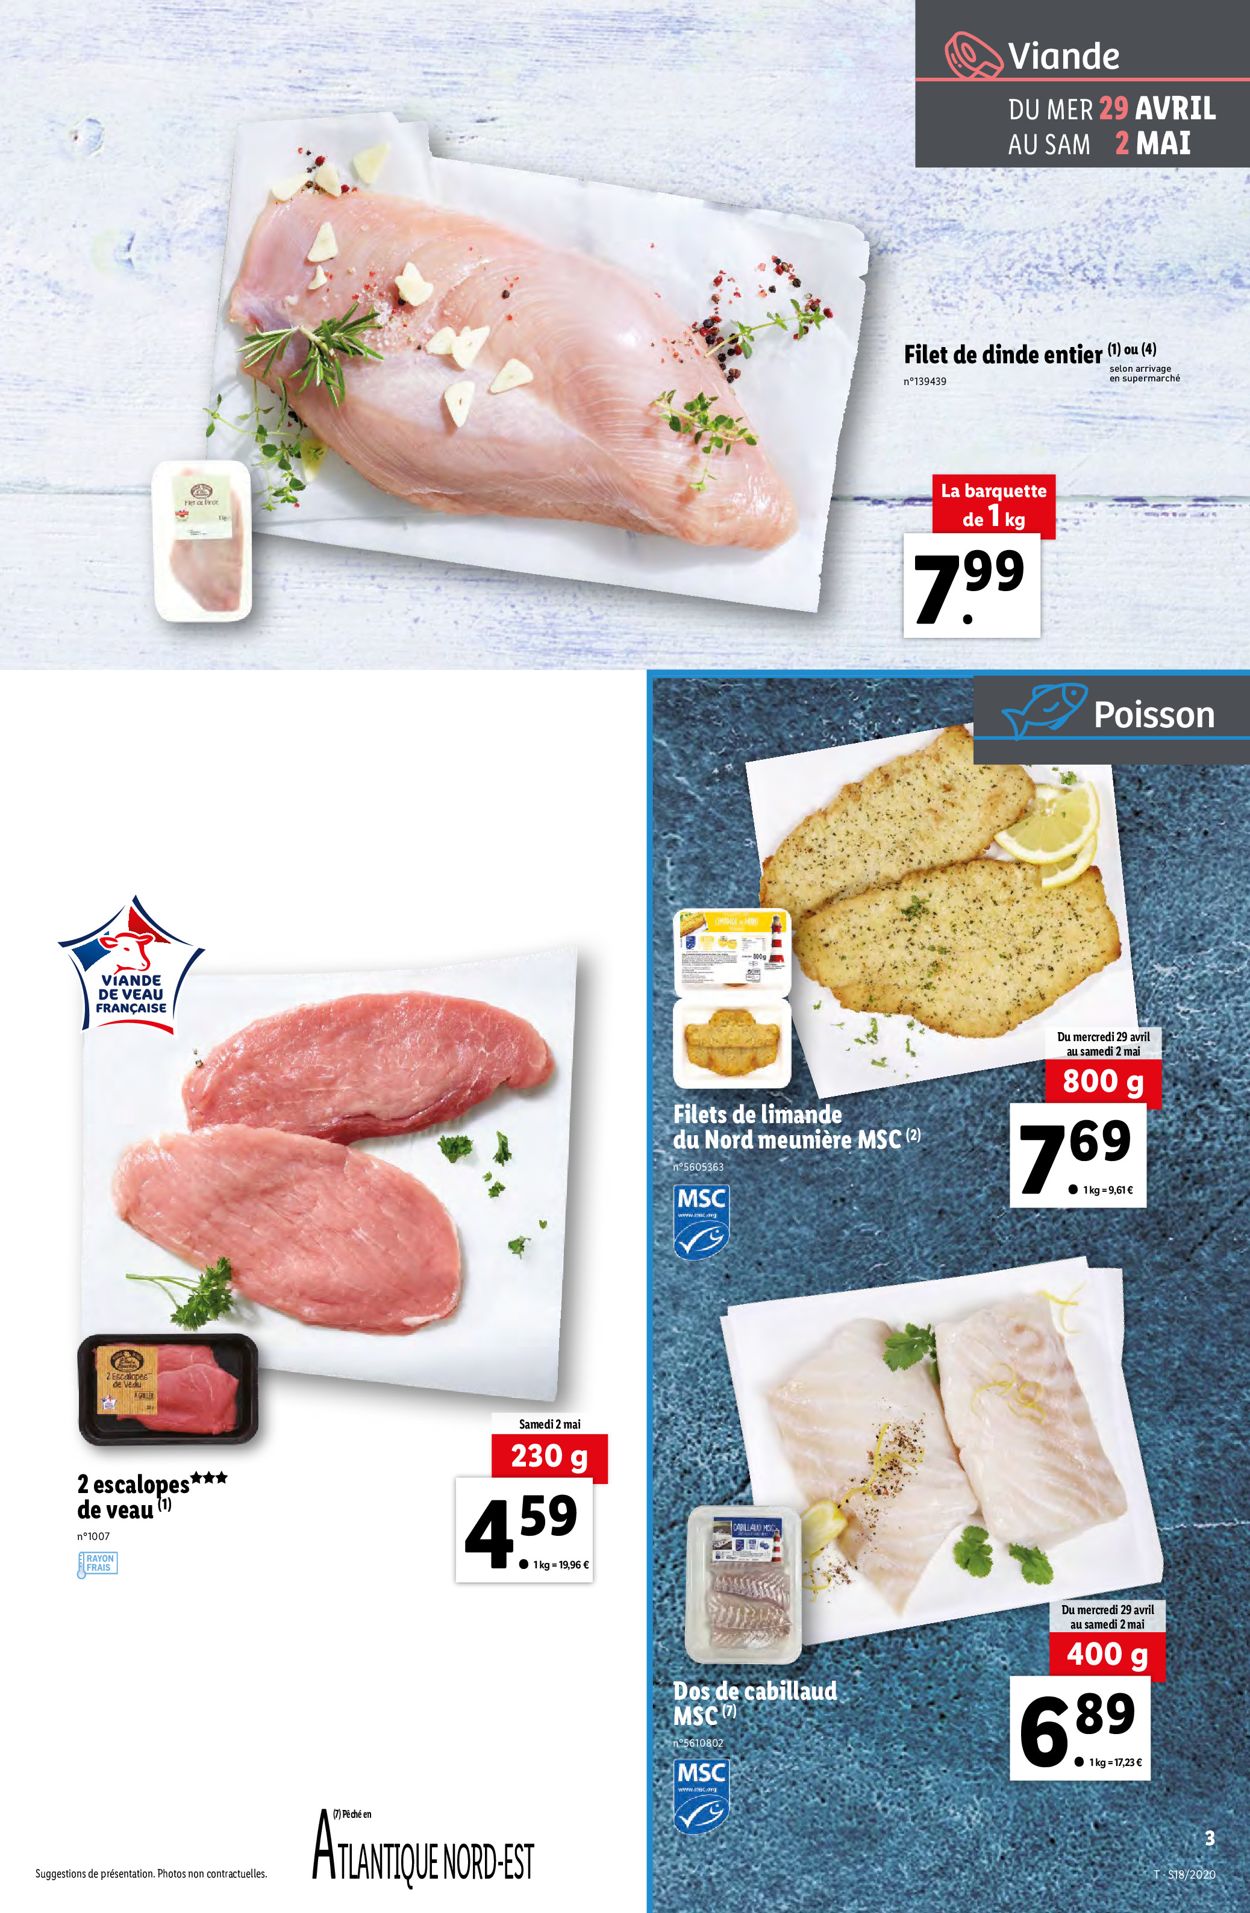 Lidl Catalogue - 29.04-05.05.2020 (Page 3)